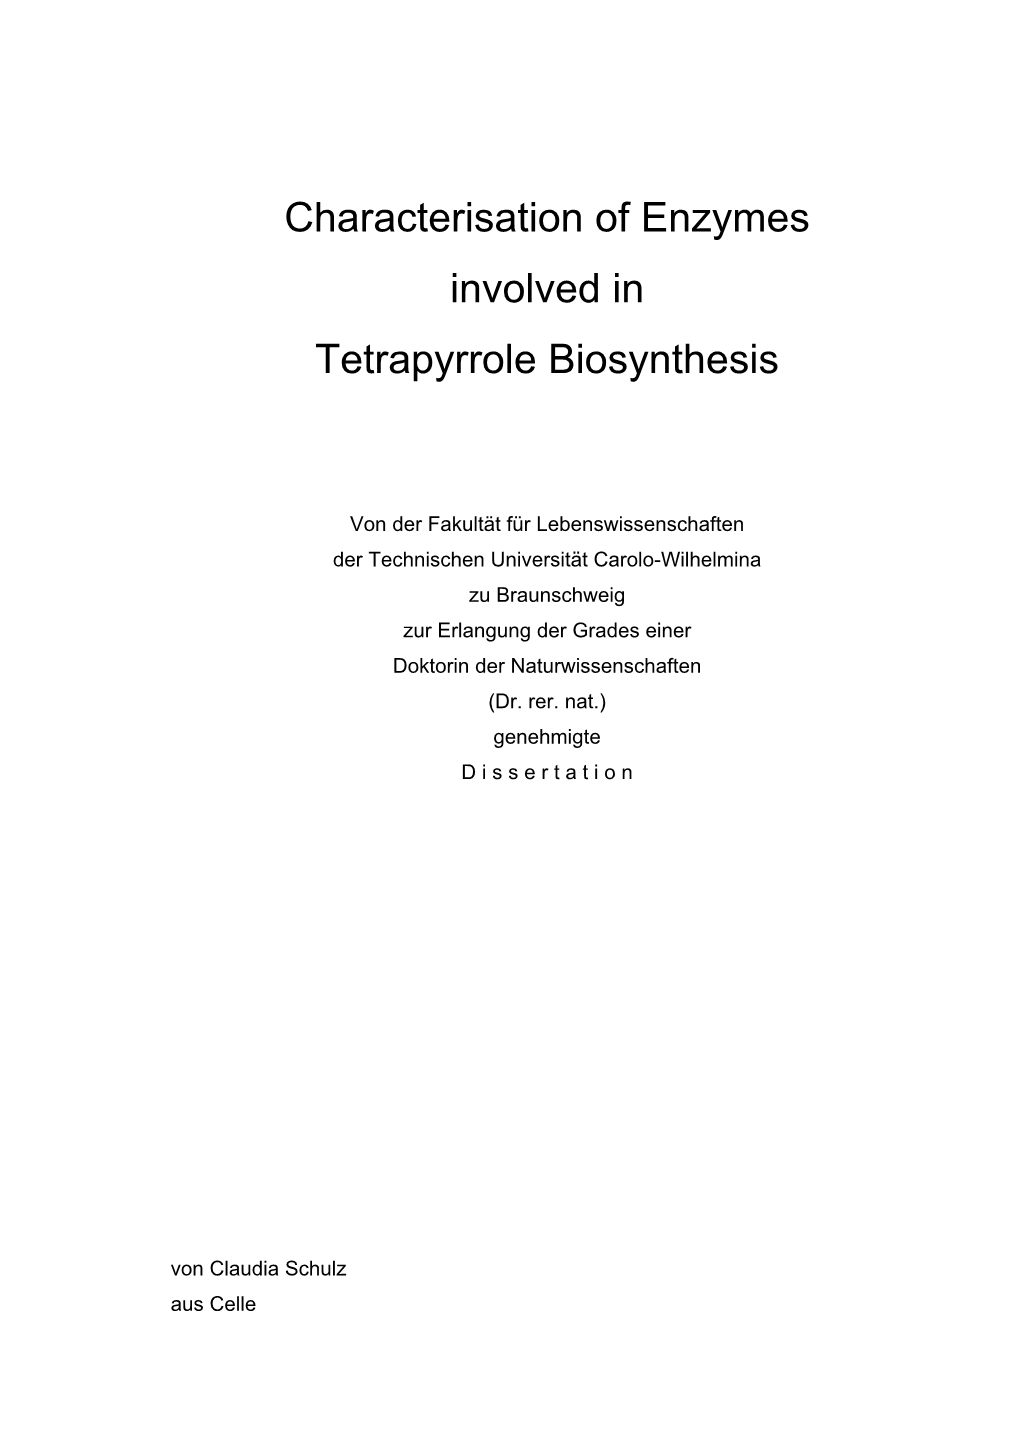 Characterisation of Enzymes Involved in Tetrapyrrole Biosynthesis